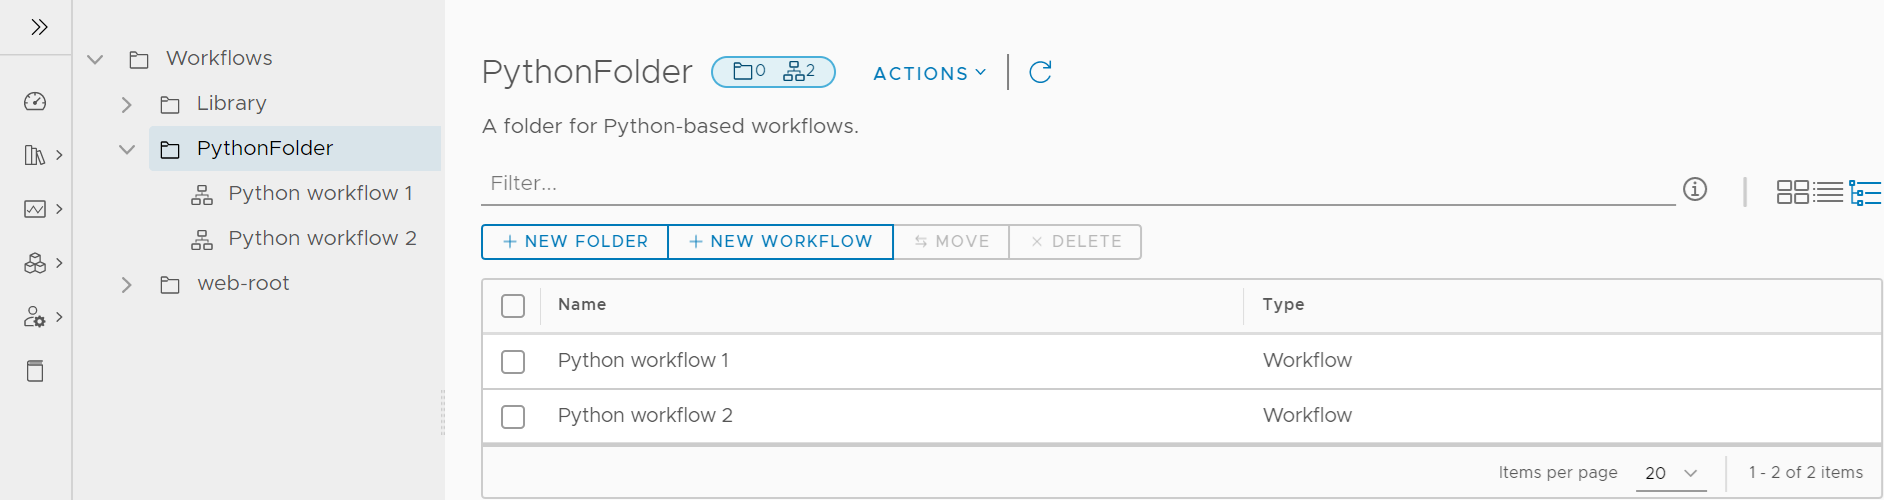 The Automation Orchestrator Client displays the Workflows page in Tree View.